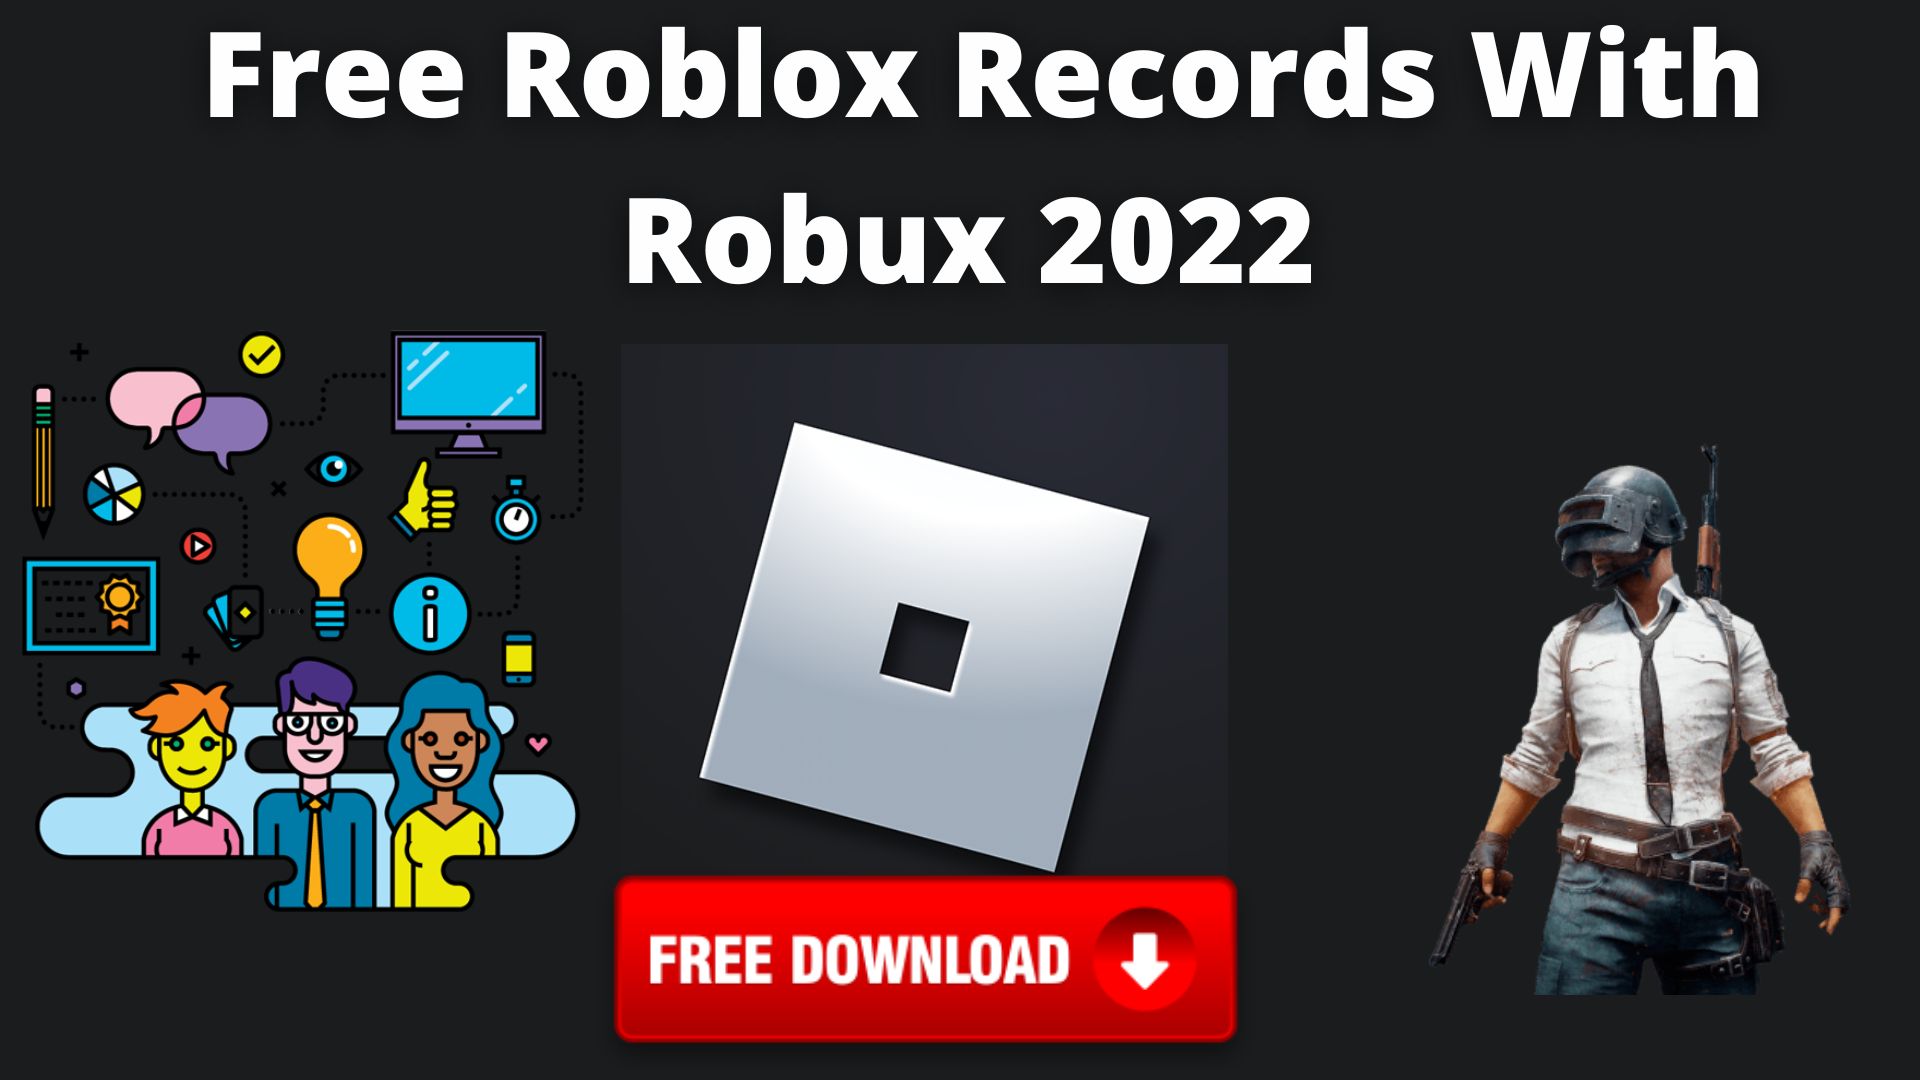 Free roblox records with robux 2022 